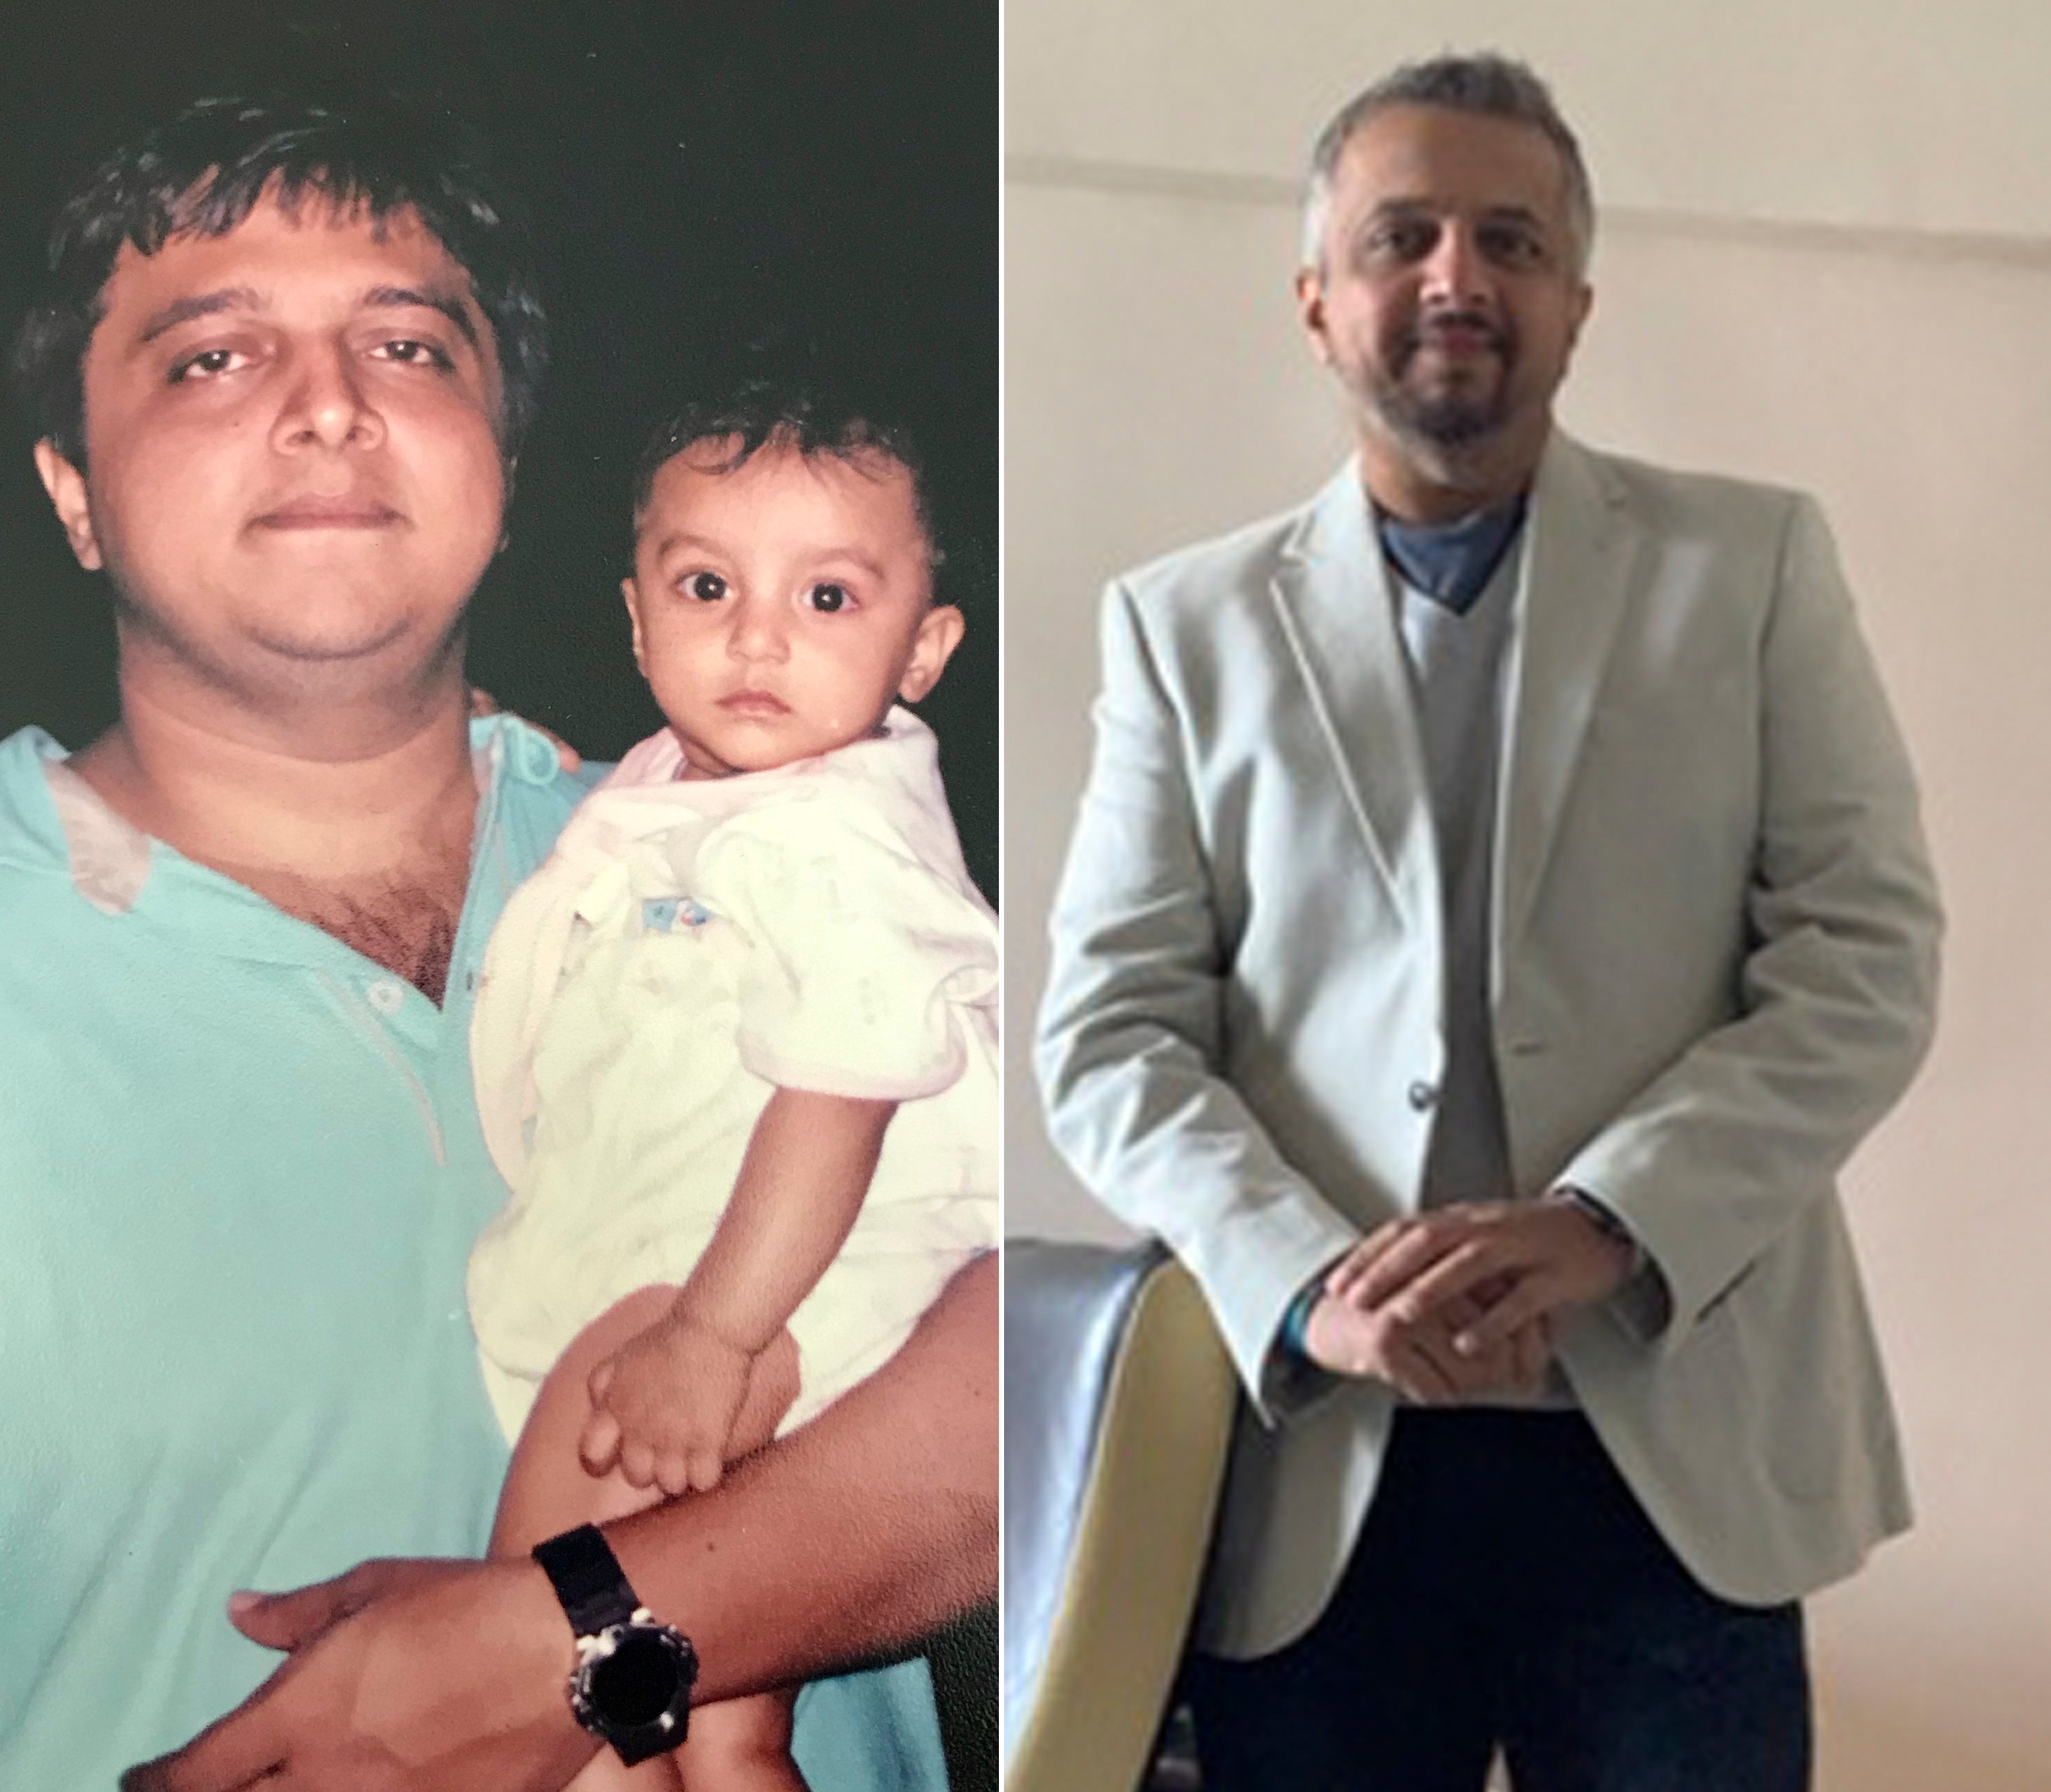 Hong Kong-based businessman Darshan Parekh before he lost weight  (above left) and after he took up running and lost 22kg (above right). Photo: Darshan Parekh